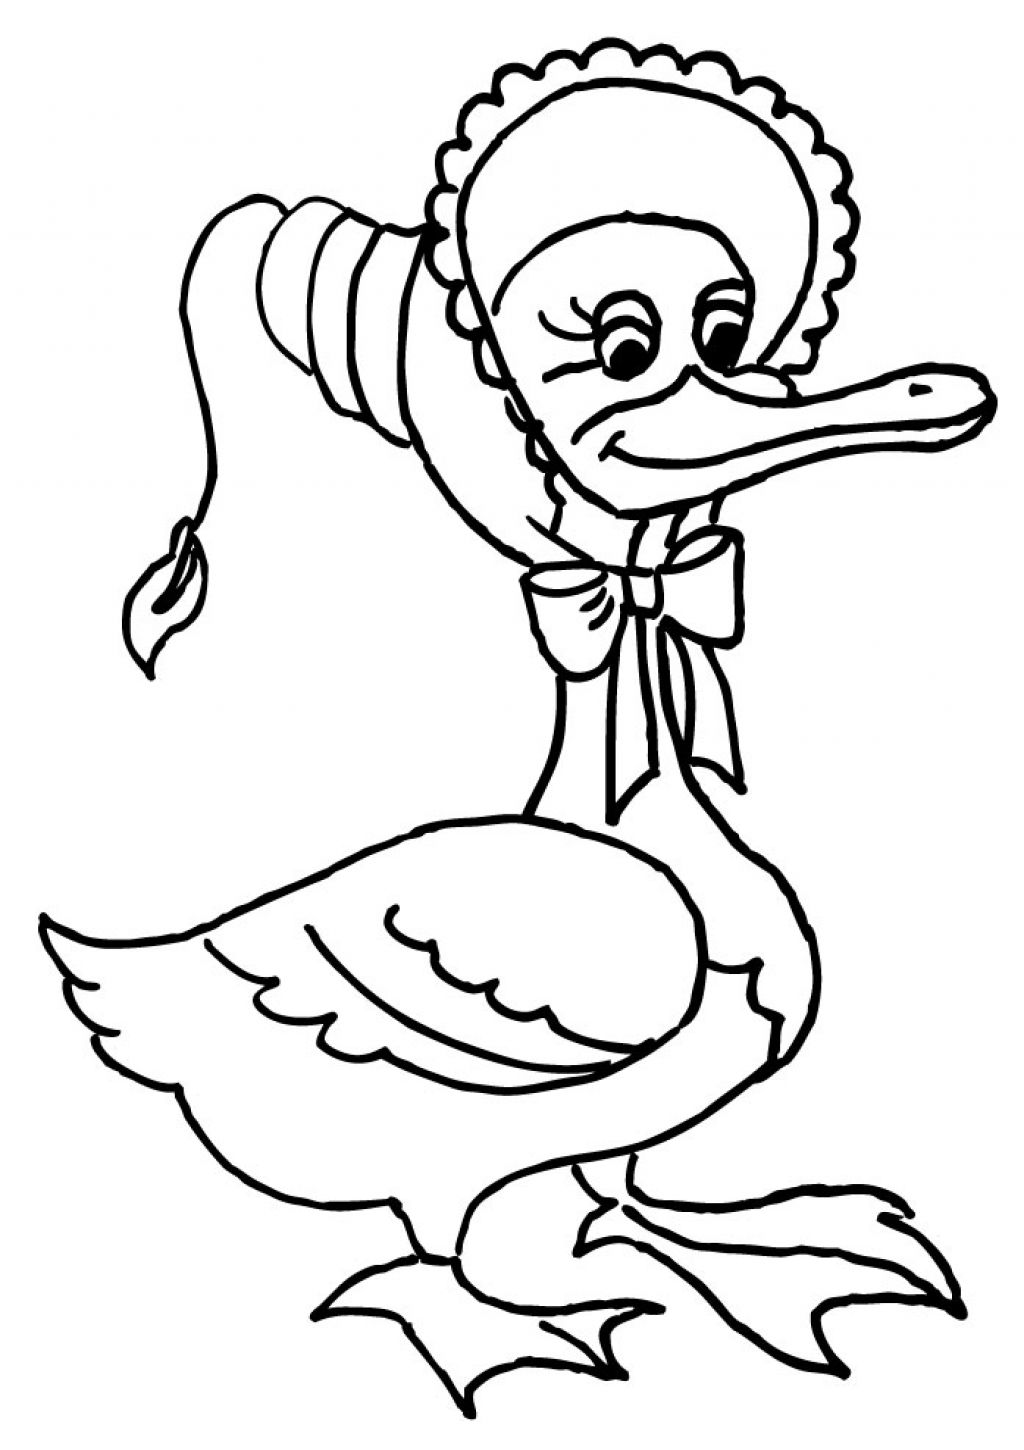 mother goose clipart images - photo #30